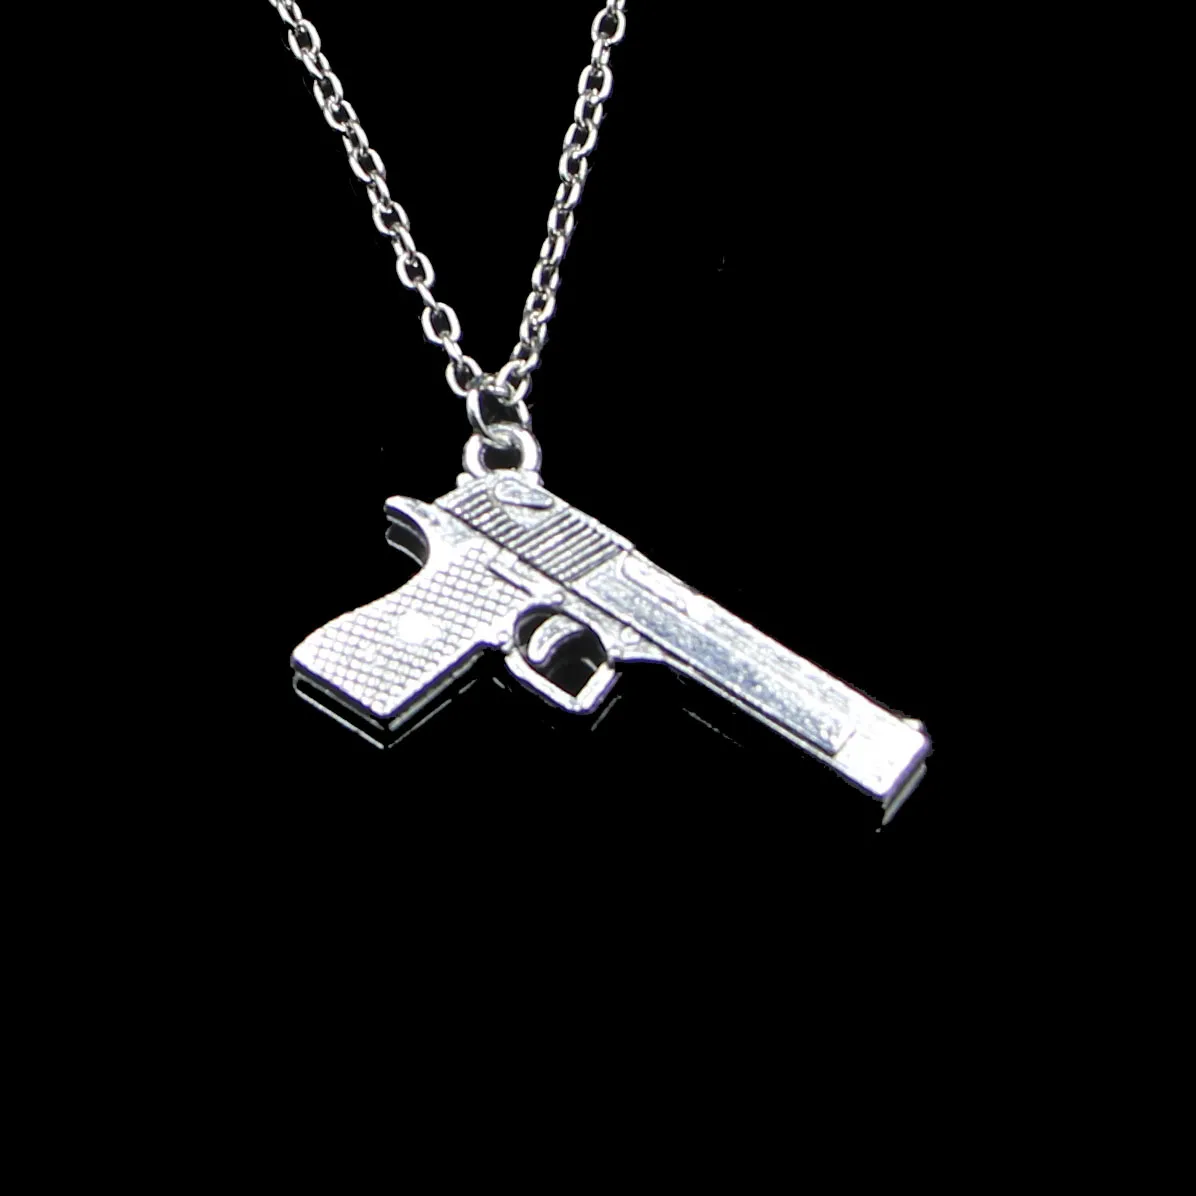 Fashion 45*20mm Gun Browning Pistol Pendant Necklace Link Chain For Female Choker Necklace Creative Jewelry party Gift